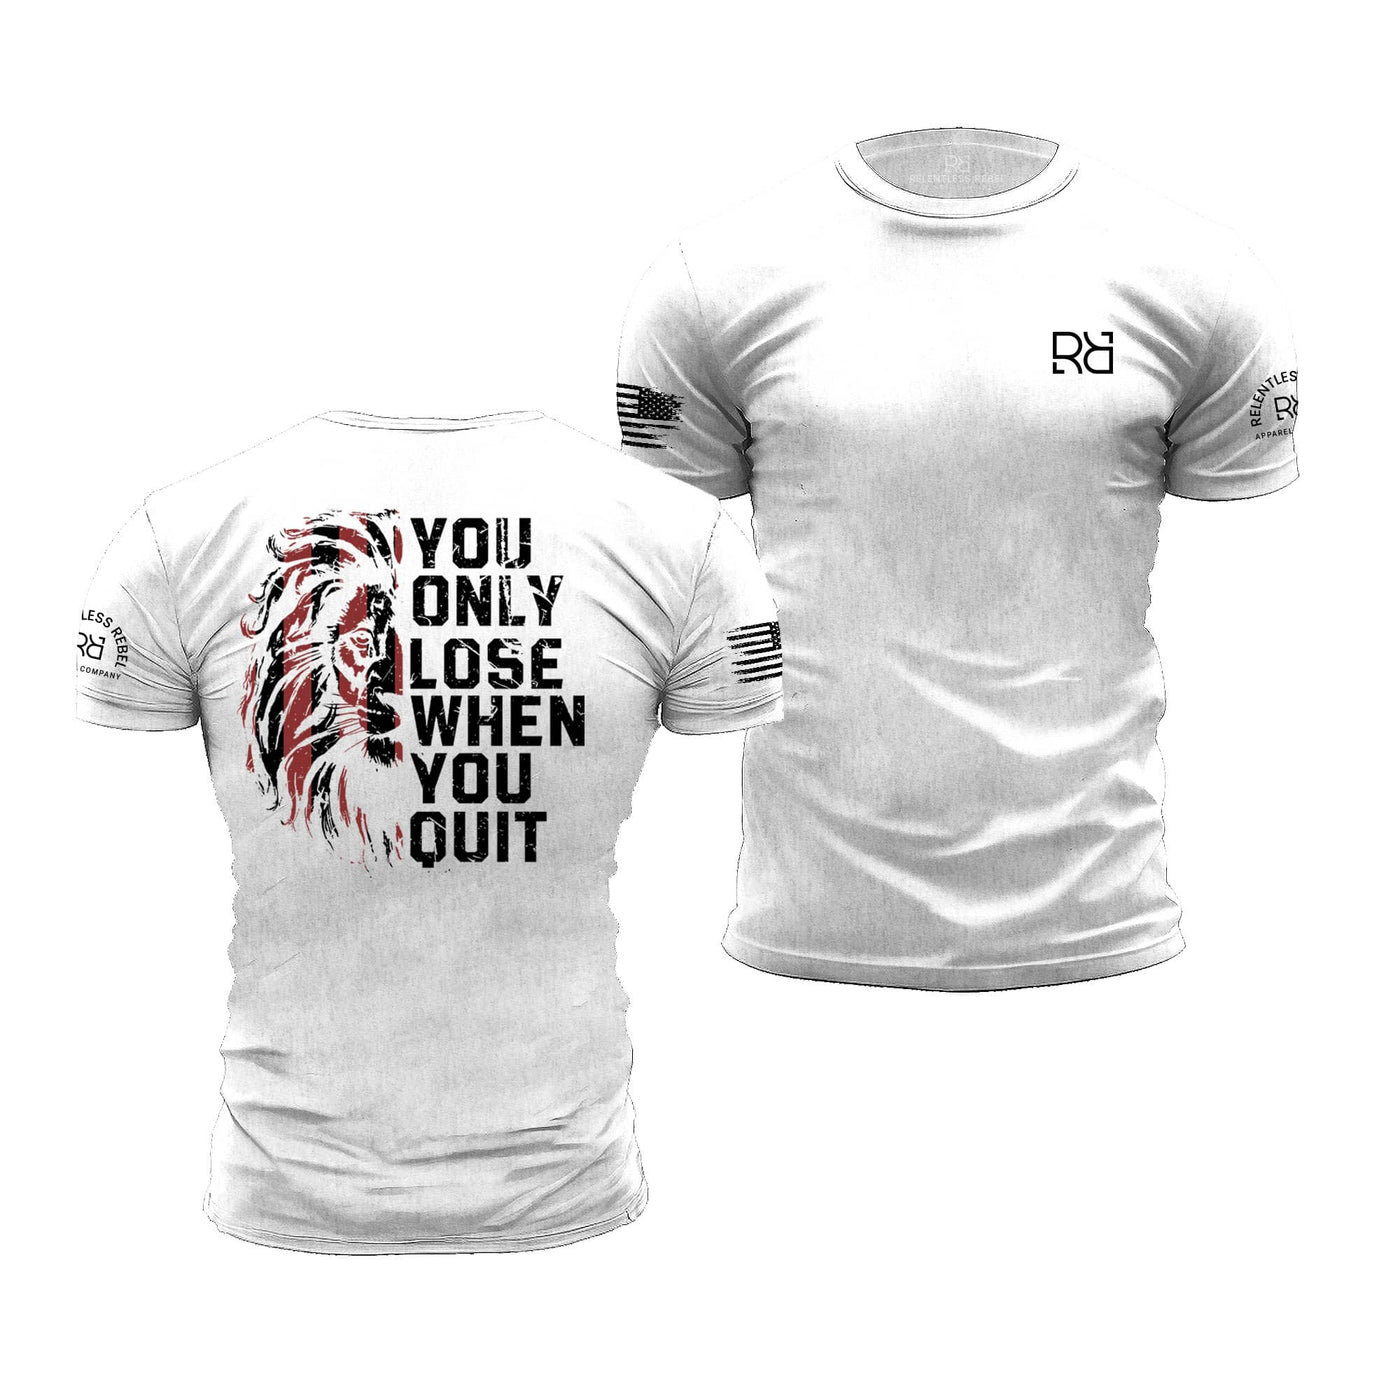 You Only Lose When You Quit | Blue | Premium Men's Tee